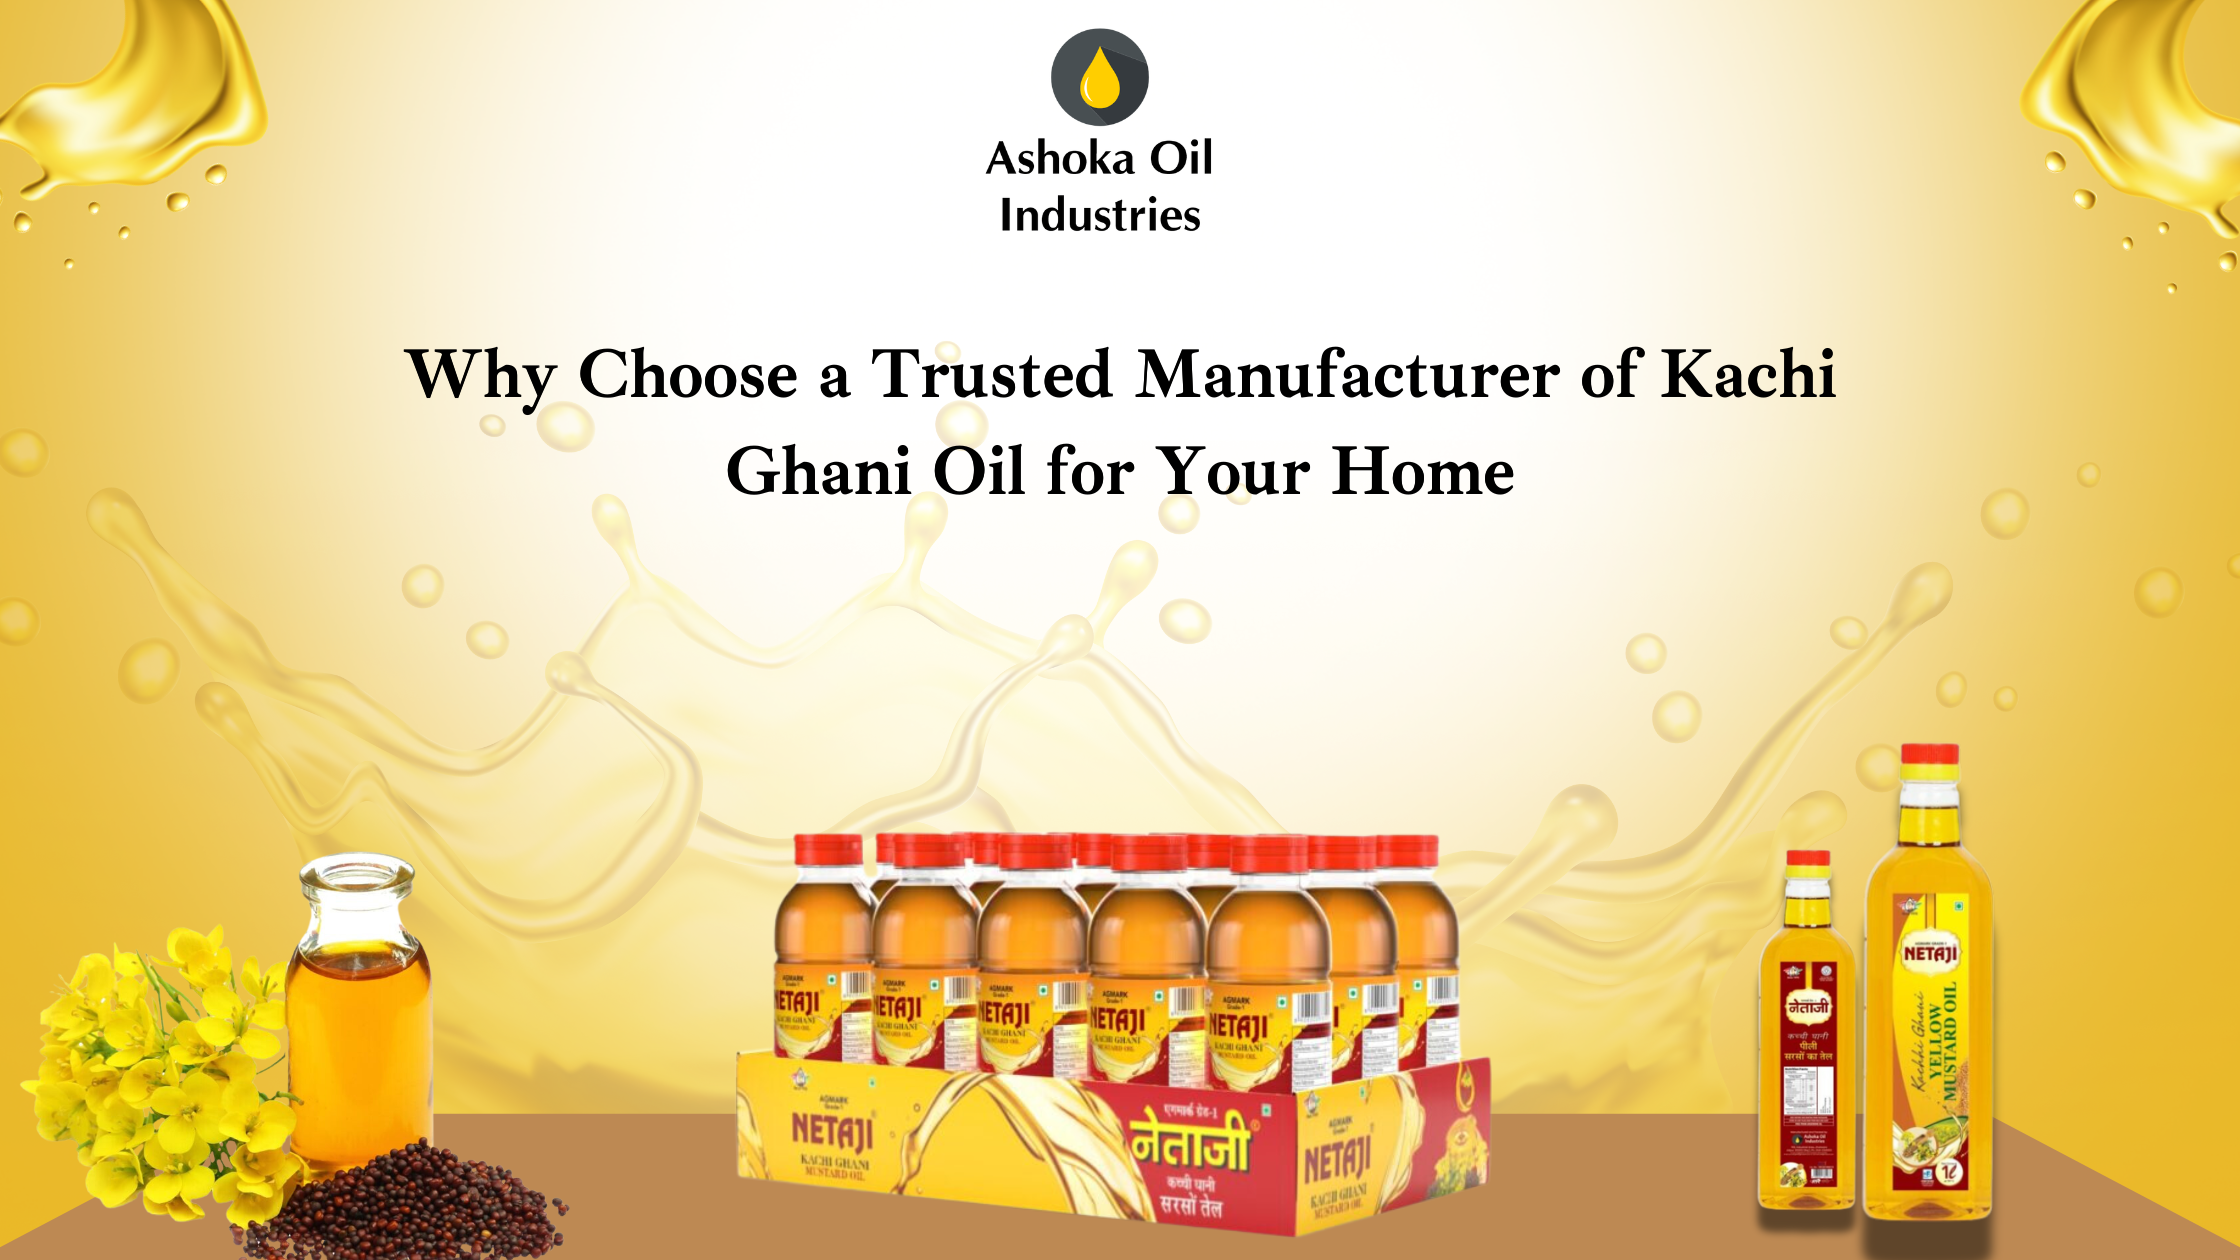 Why Choose a Trusted Manufacturer of Kachi Ghani Oil for Your Home